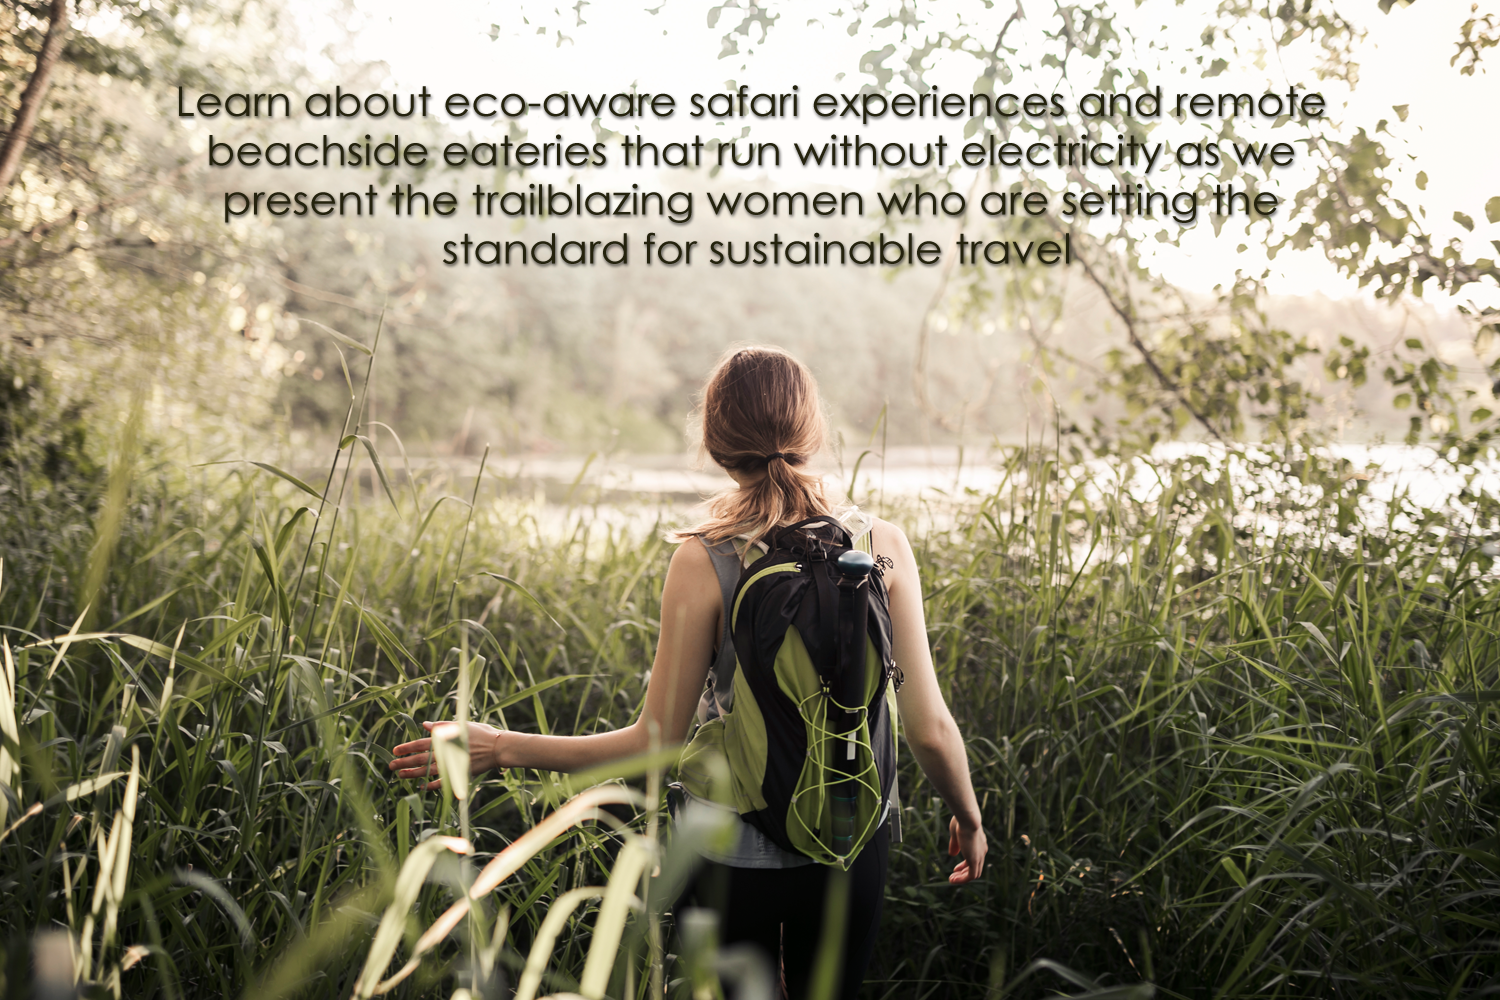 Learn about eco-aware safari experiences and remote beachside eateries that run without electricity as we present the trailblazing women who are setting the standard for sustainable travel.